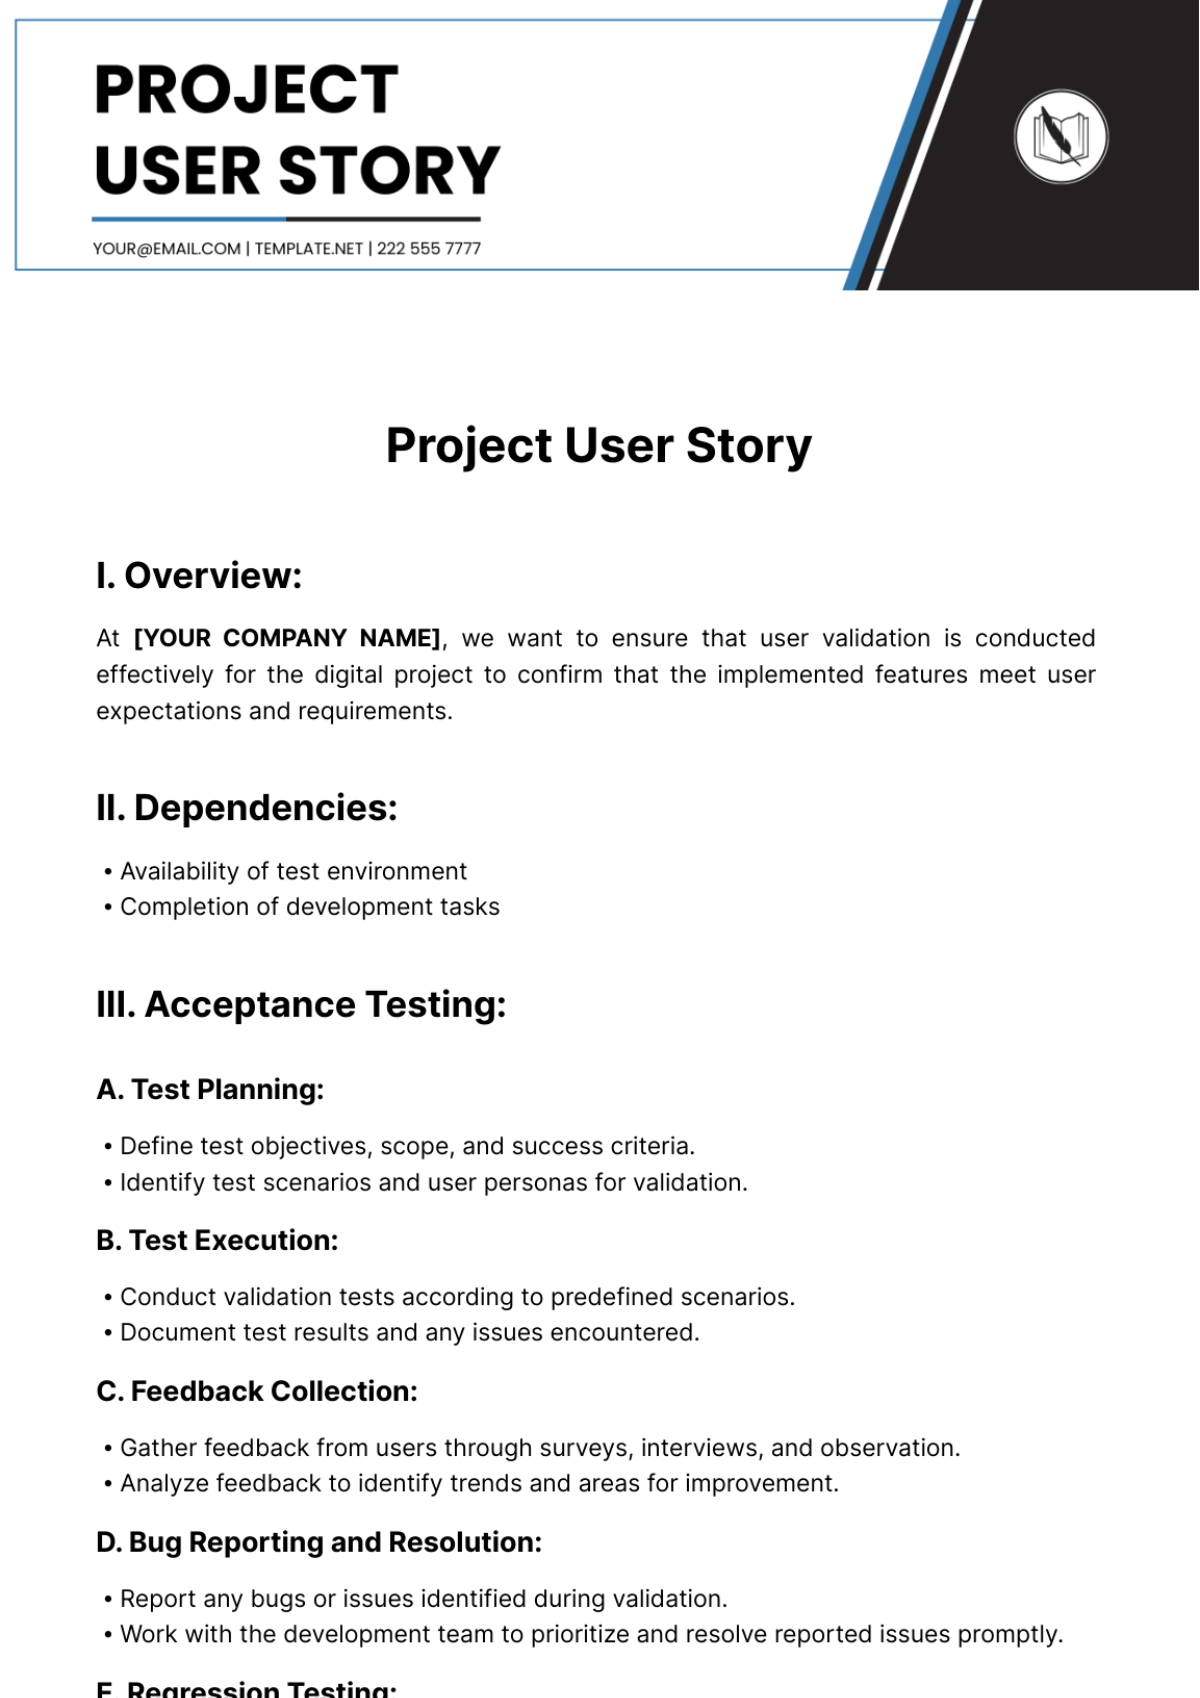 Free Project User Story Template